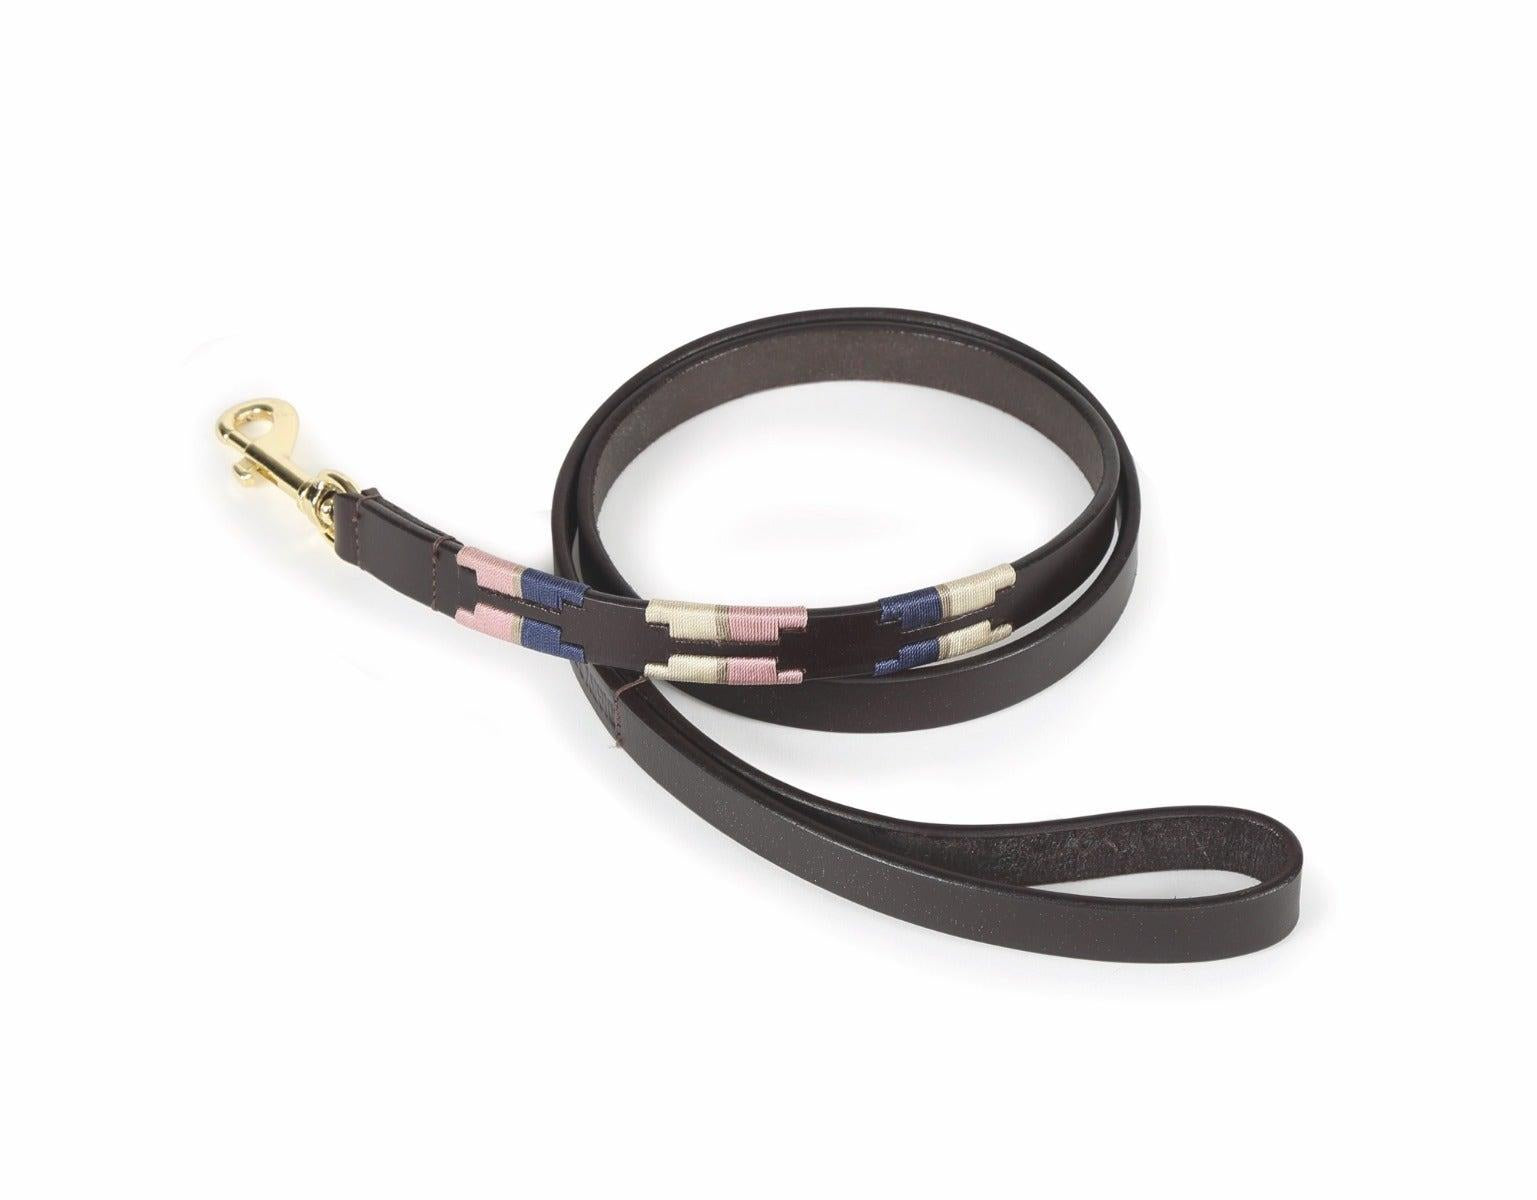 Digby & Fox Drover Polo Dog Lead - Just Horse Riders